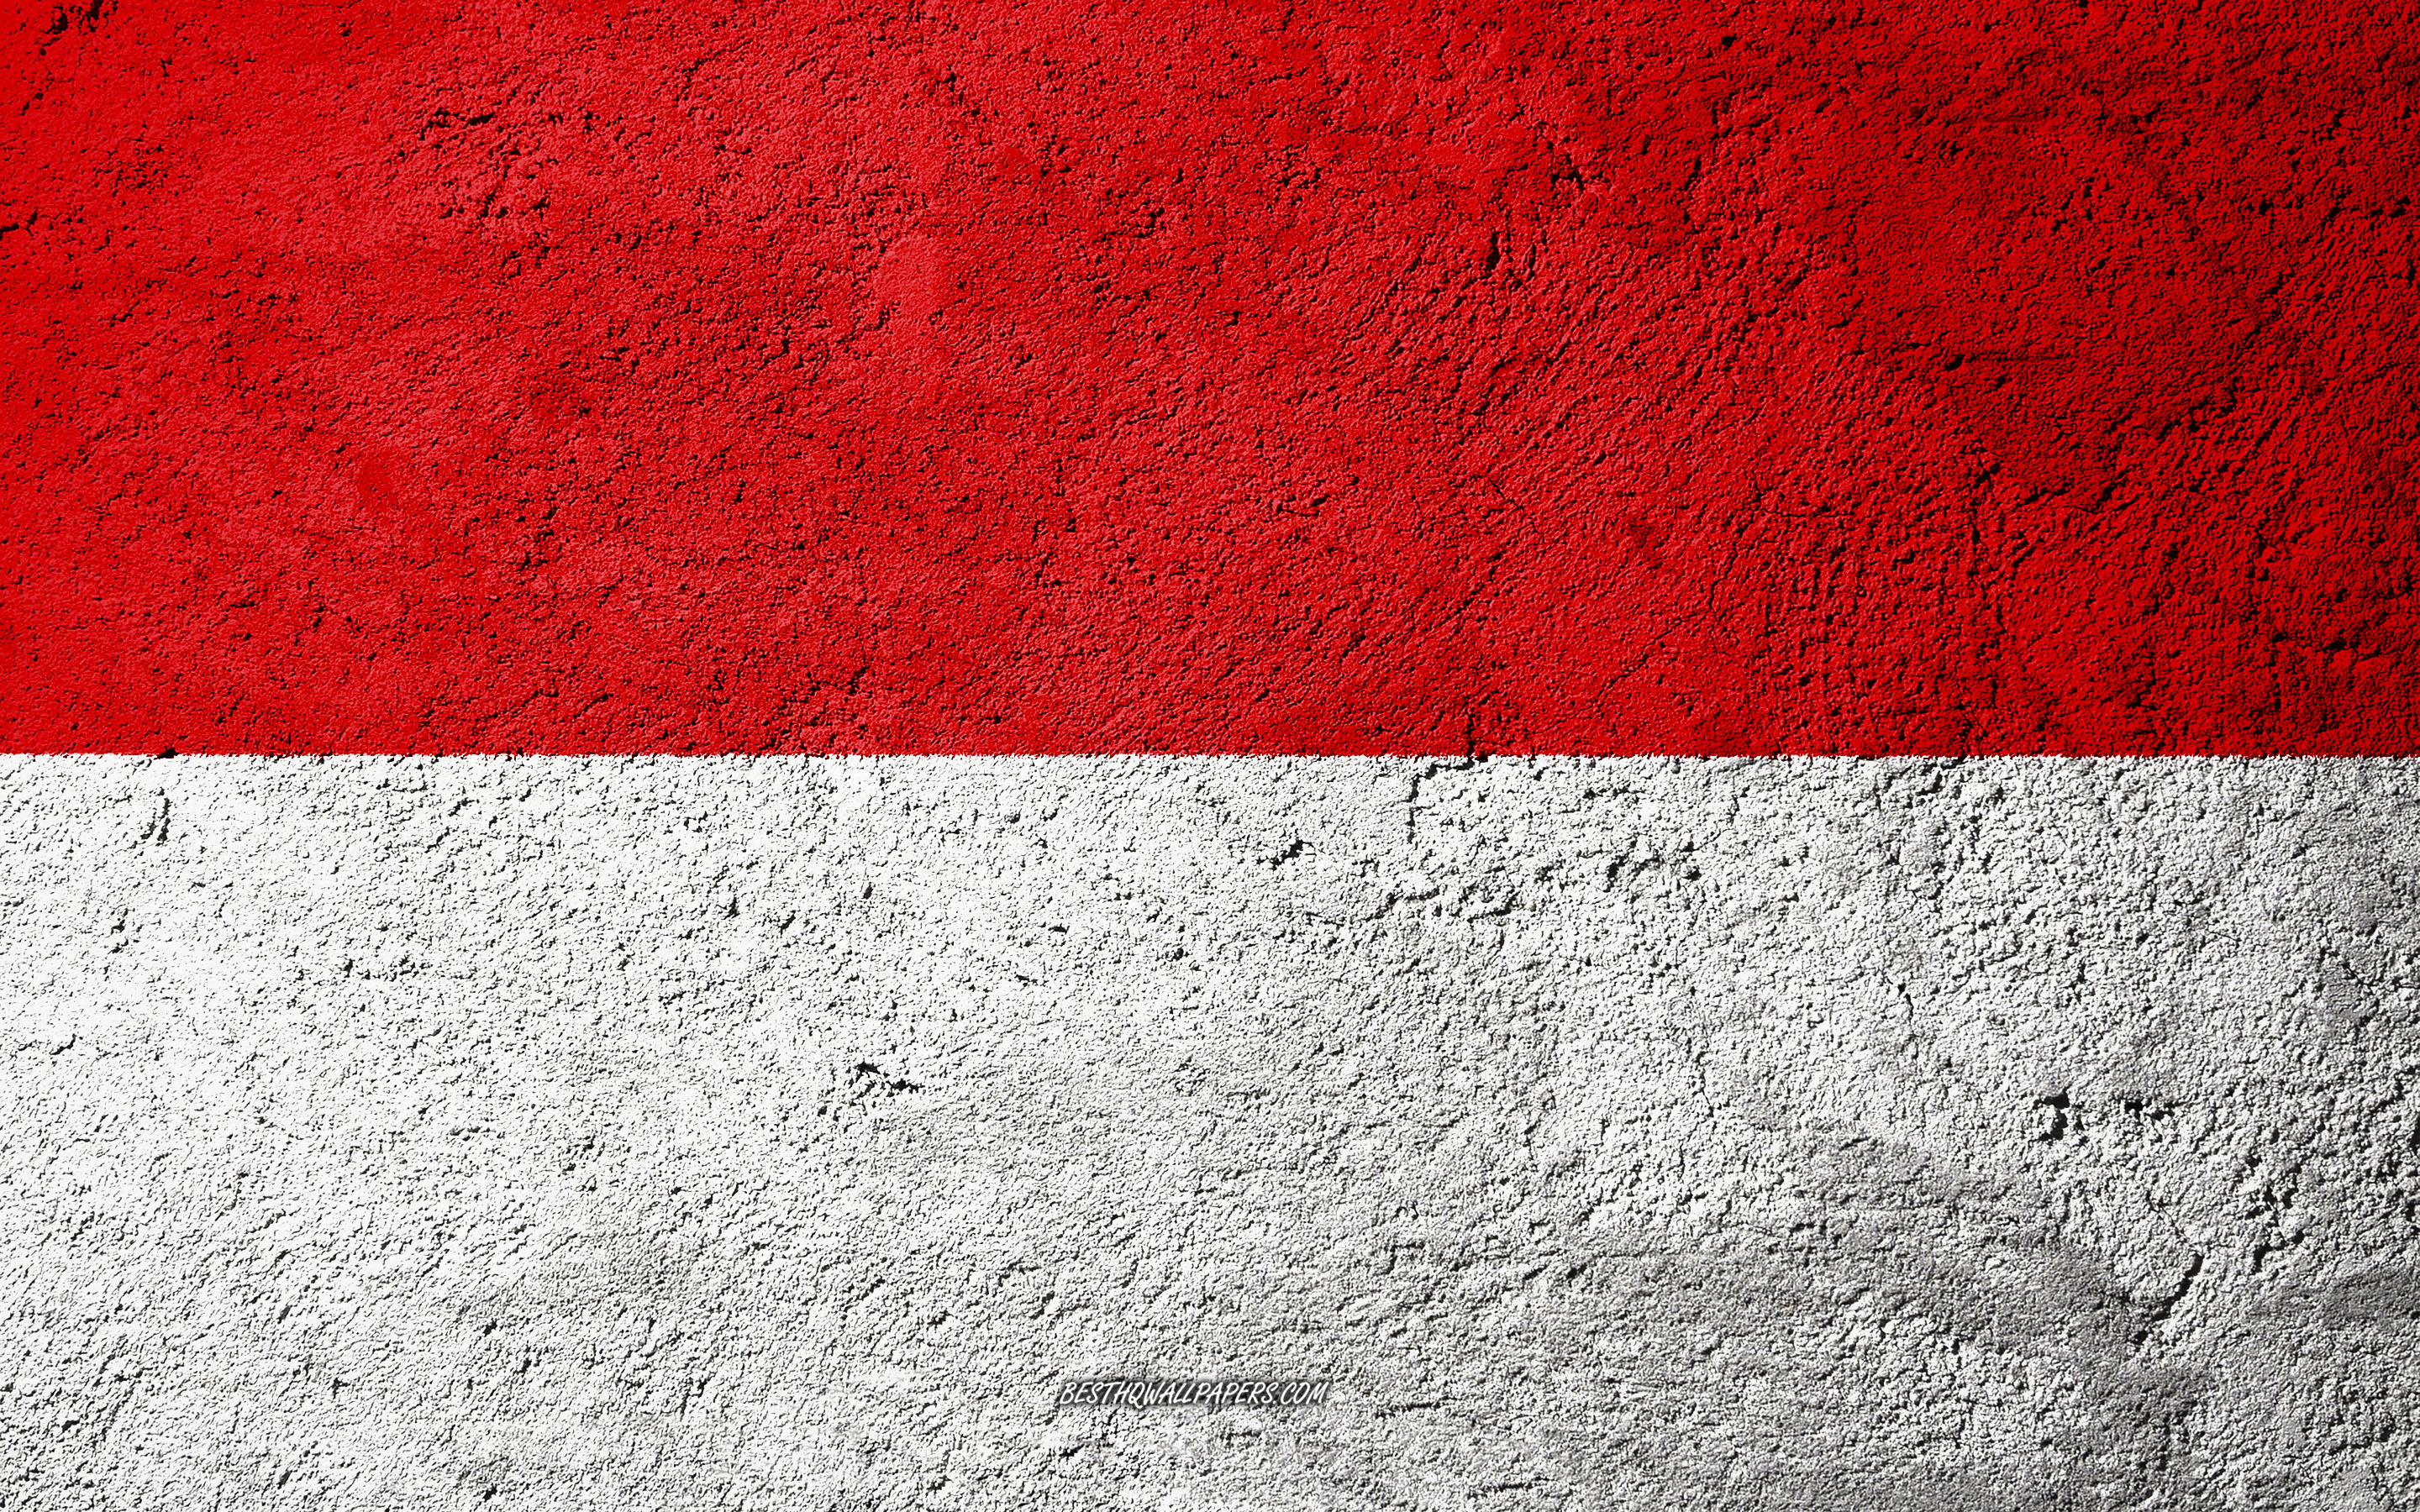 Download wallpaper Flag of Indonesia, concrete texture, stone background, Indonesia flag, Asia, Indonesia, flags on stone for desktop with resolution 2880x1800. High Quality HD picture wallpaper